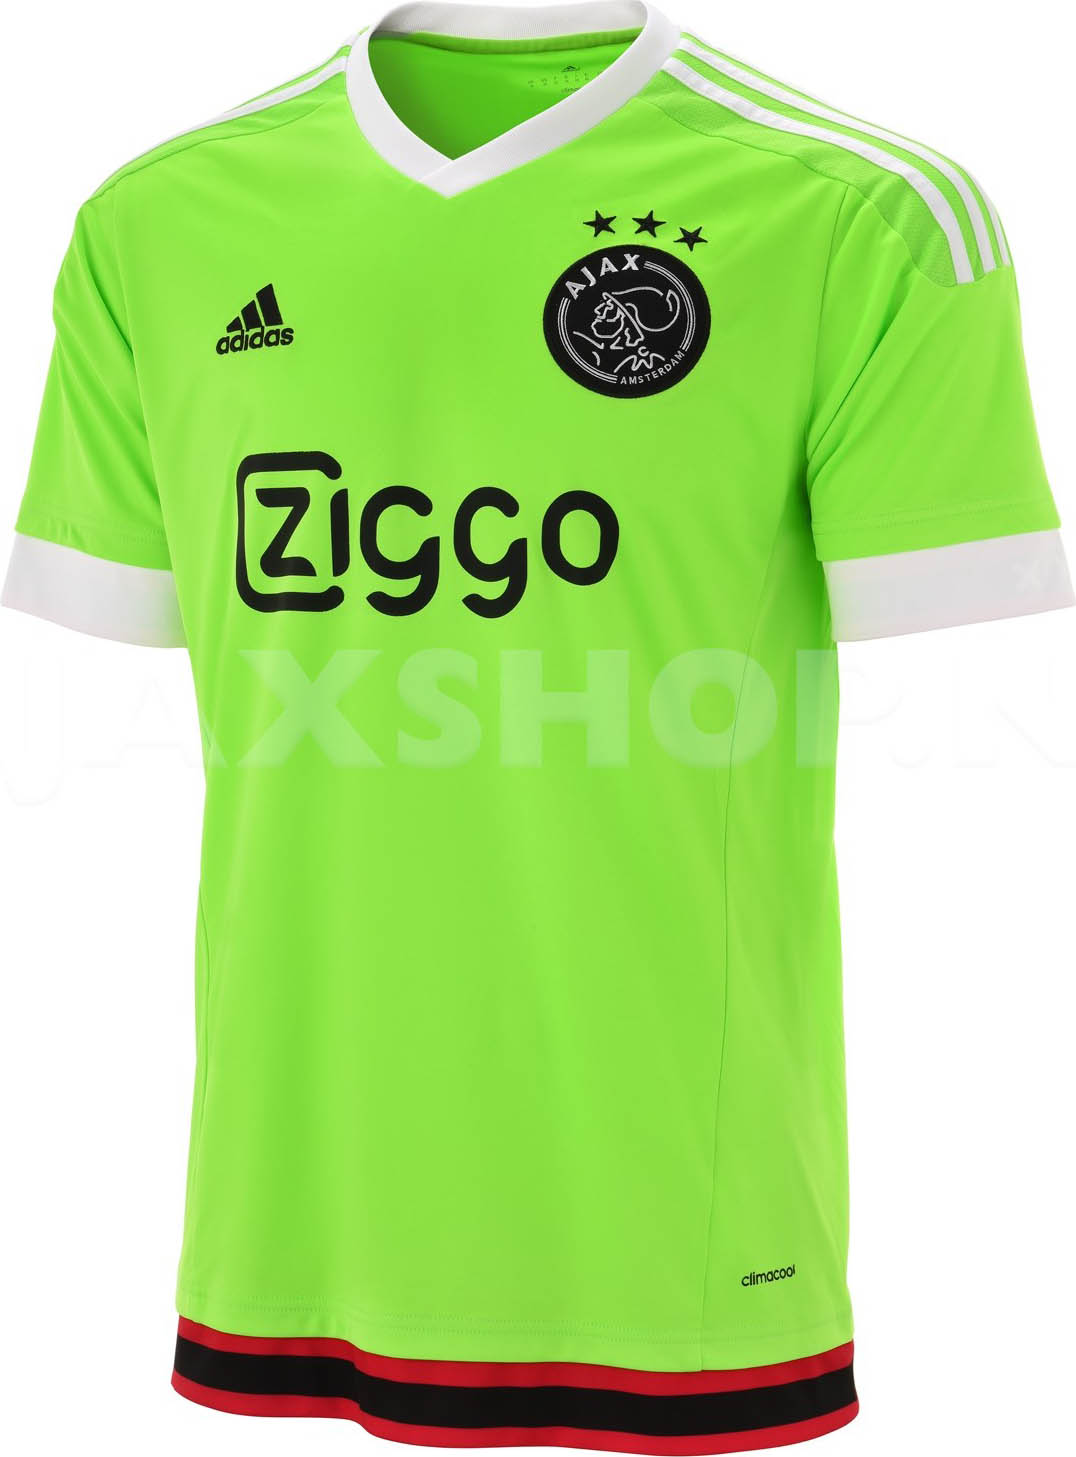 Gezichtsvermogen Ounce Portret Ajax 15-16 Home and Away Kits Released - Footy Headlines